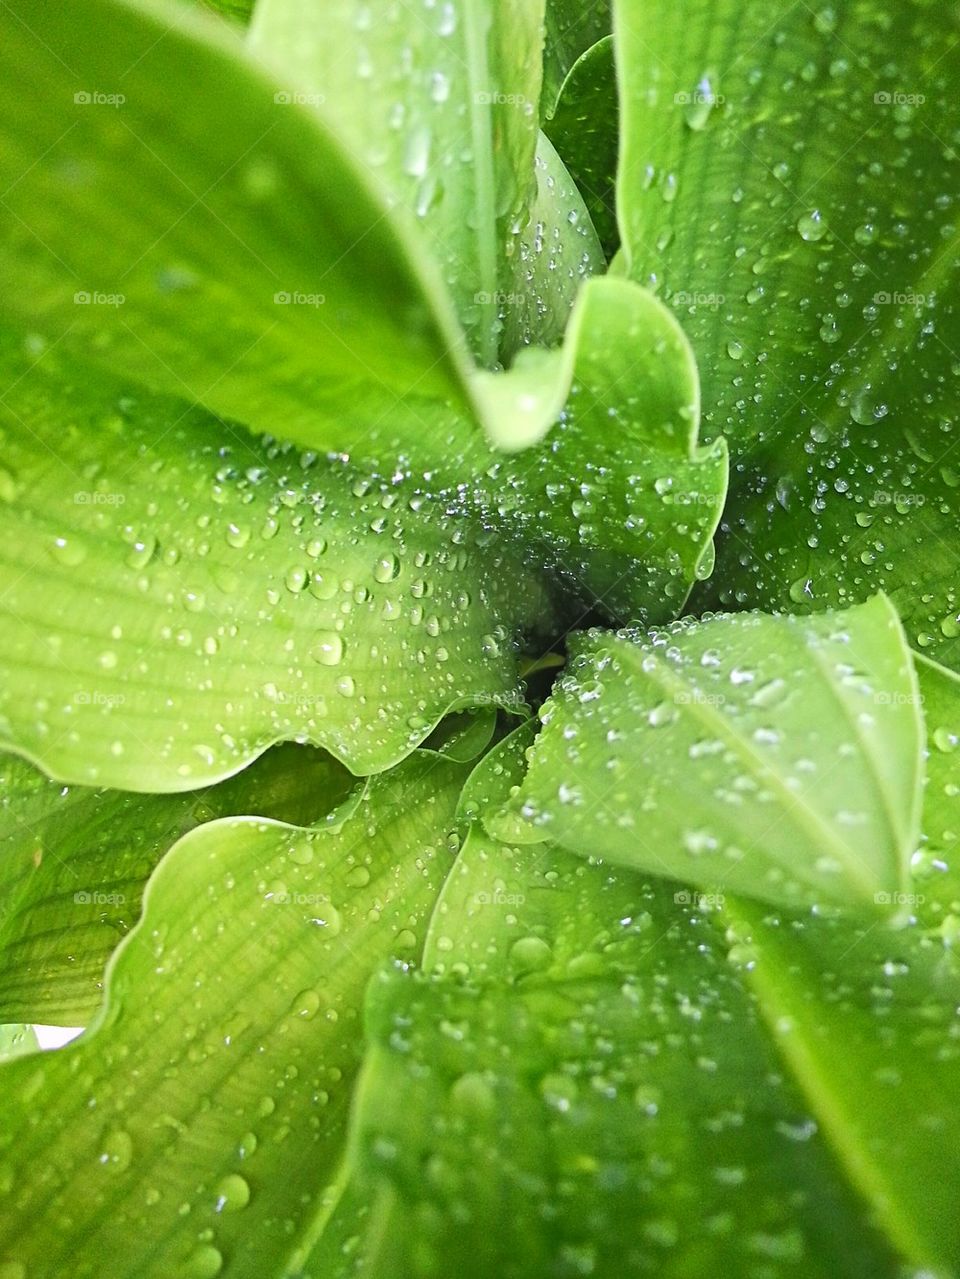 Leaves with water drop after rain